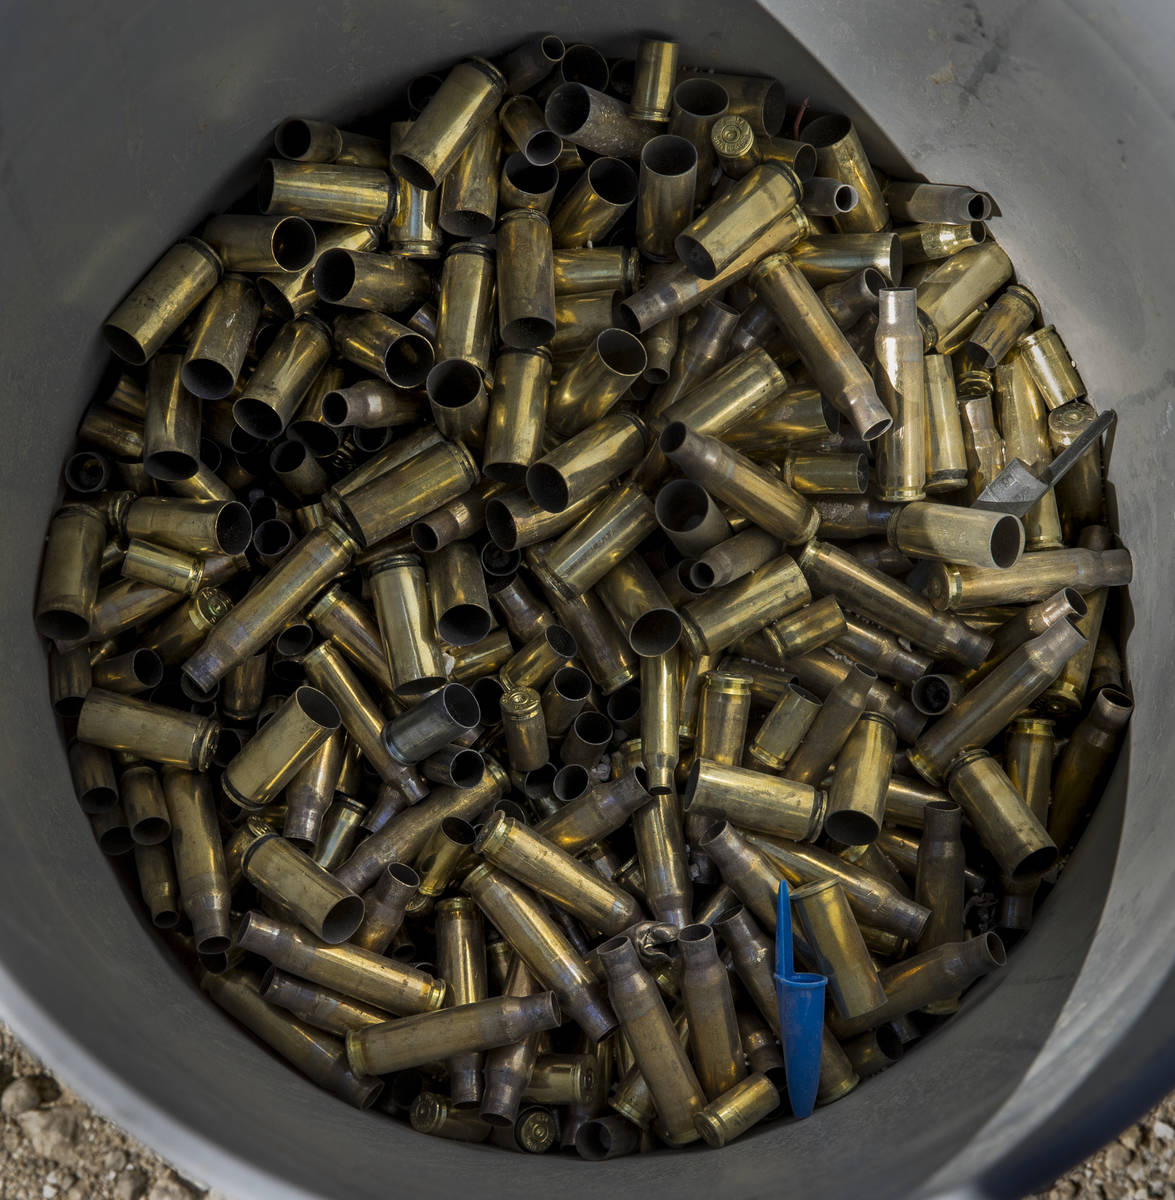 Spent cartridges are recycled by staff at Adrenaline Mountain, Thursday, Sept. 10, 2020, in Goo ...